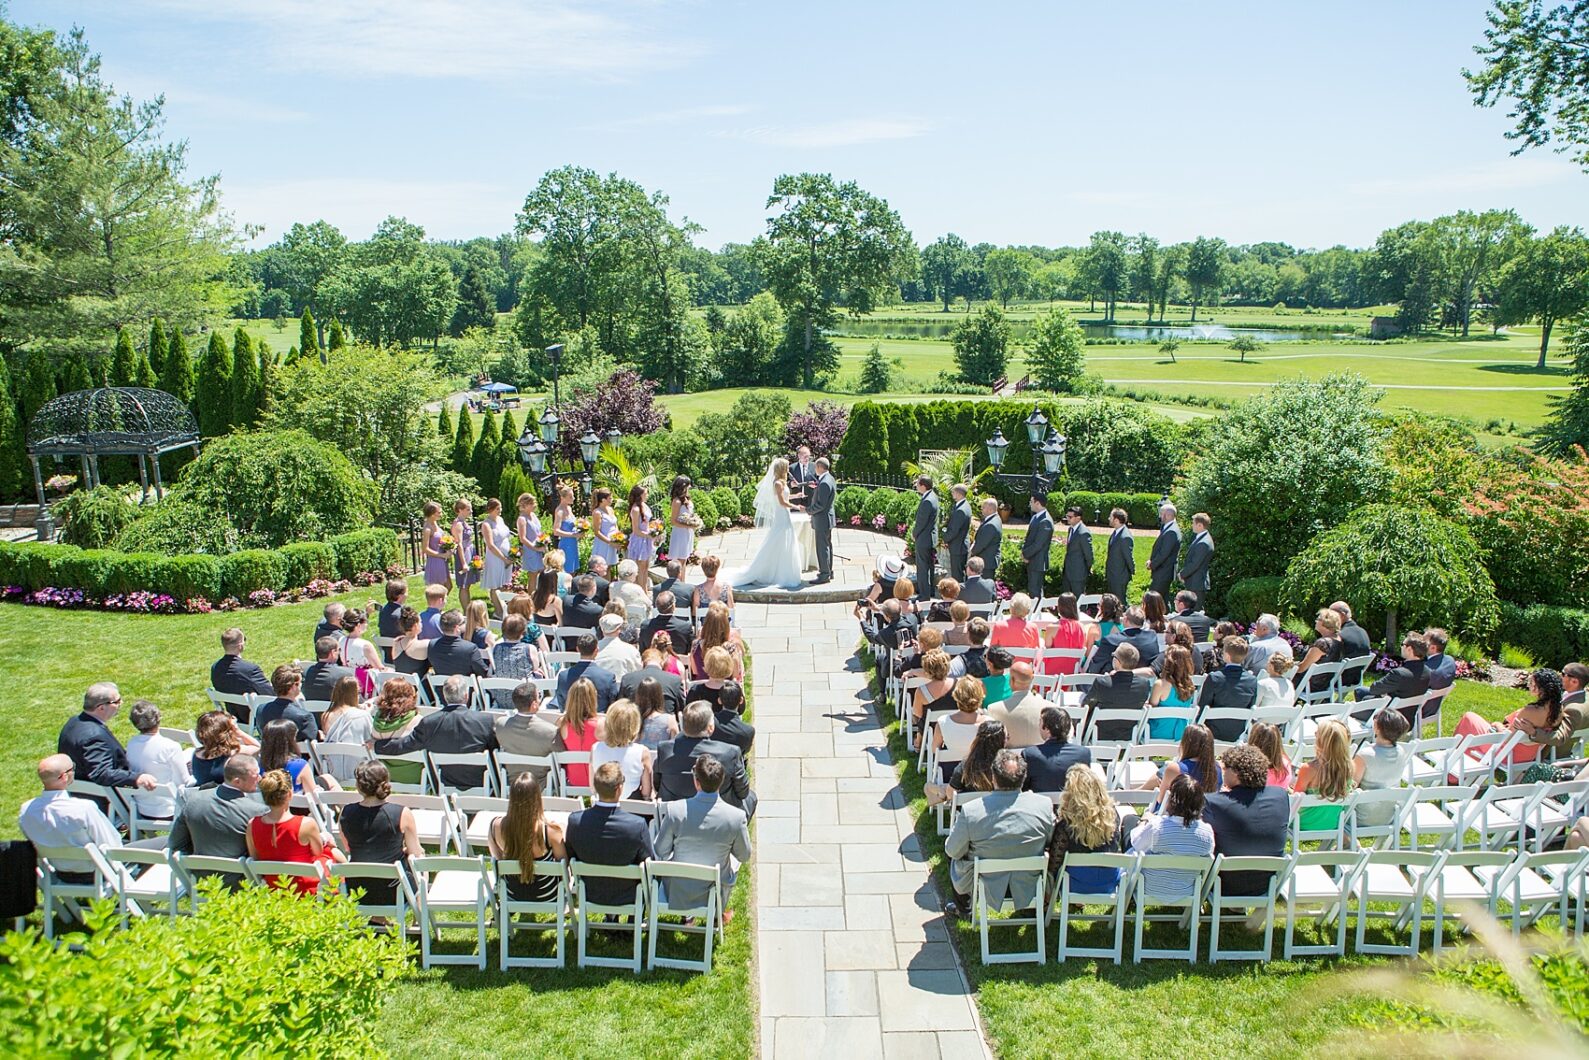 Outdoor summer wedding ceremony at The Park Savoy in New Jersey. Photo by Mikkel Paige Photography.